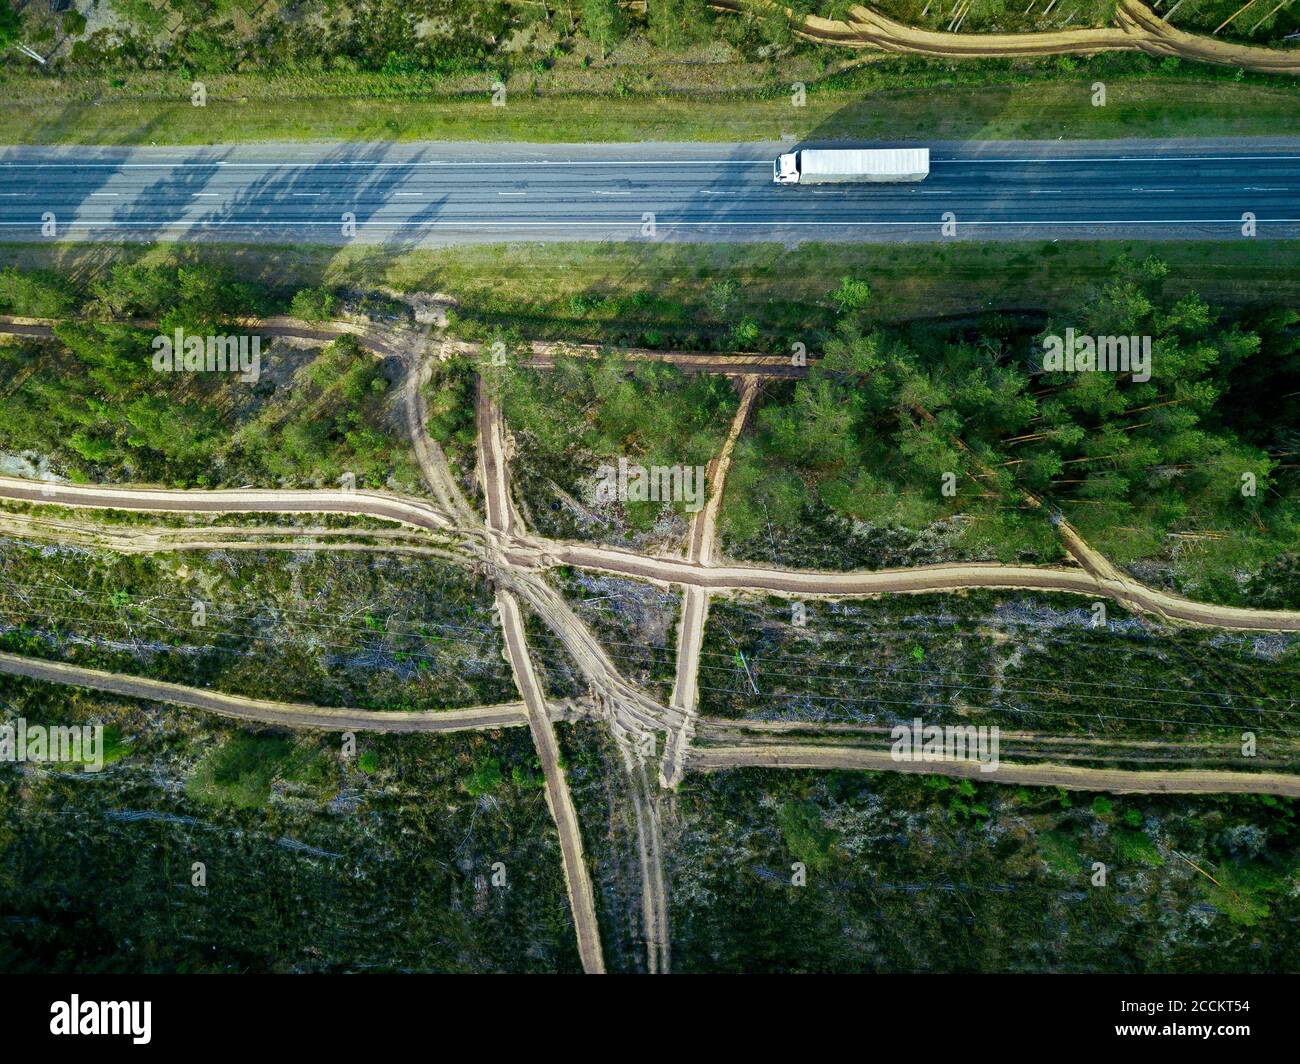 Russia, Petrozavodsk Oblast, Karelia, Road crossing forest, aerial view Stock Photo